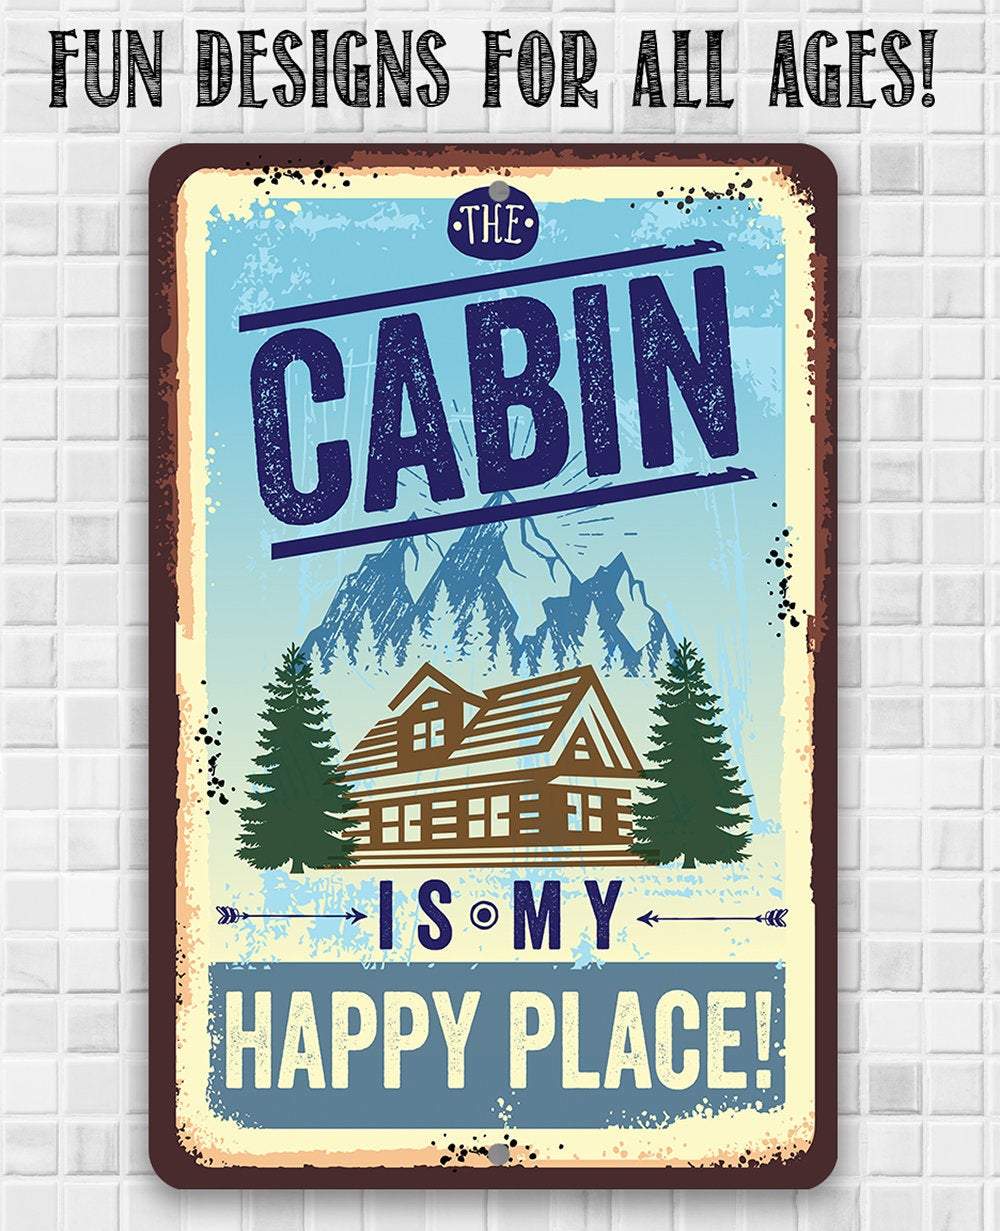 Cabin Is My Happy Place - Metal Sign | Lone Star Art.